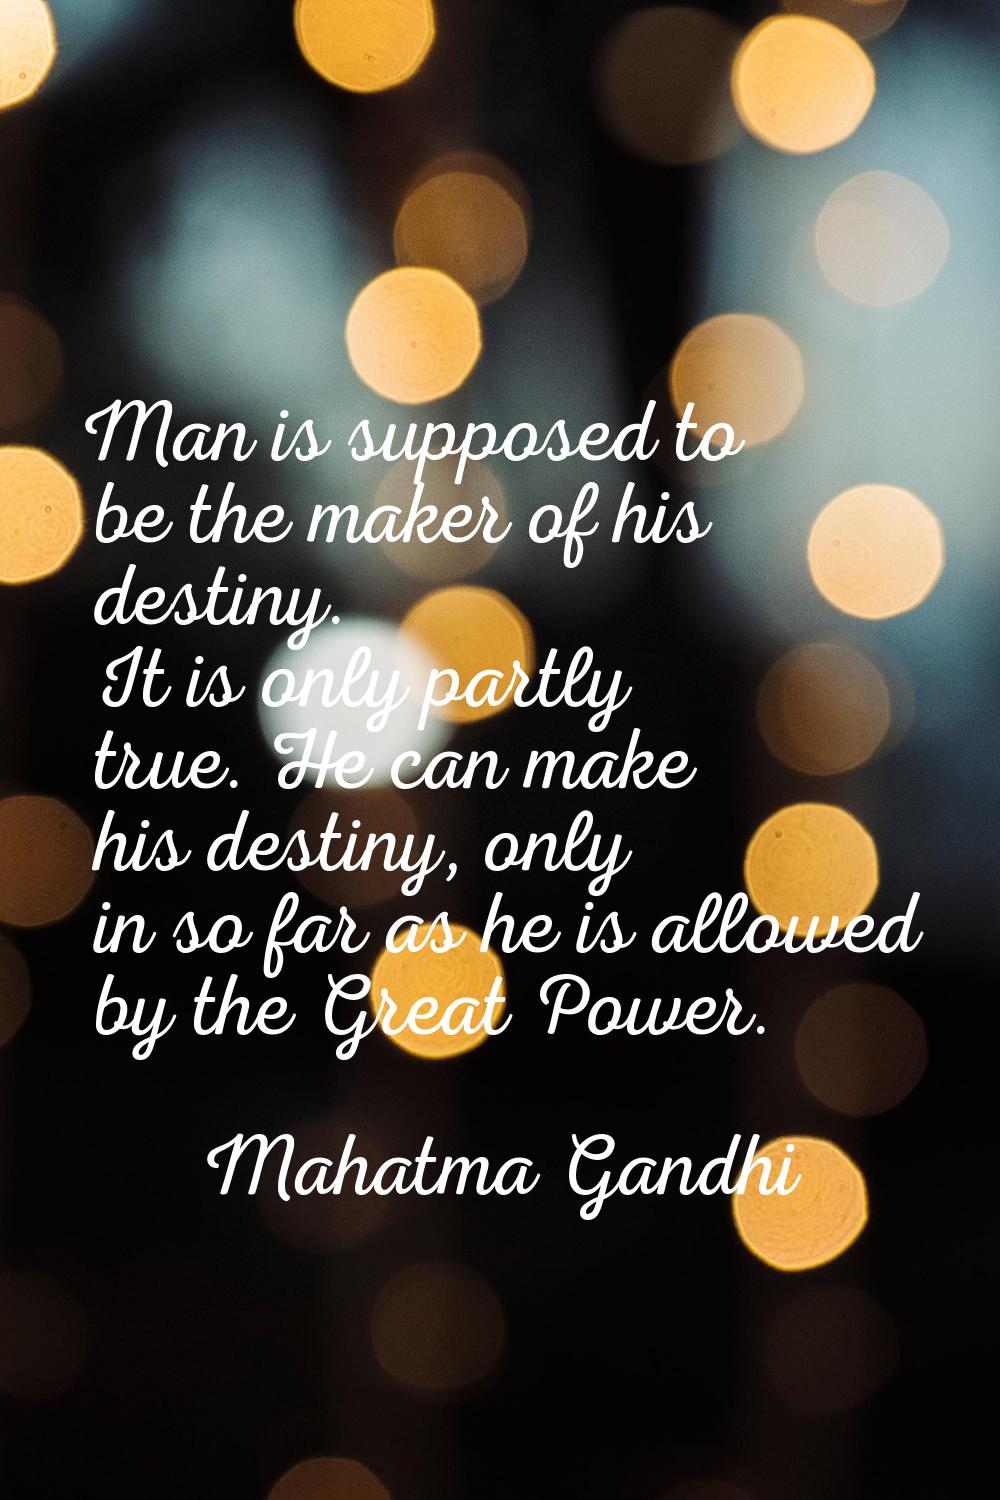 Man is supposed to be the maker of his destiny. It is only partly true. He can make his destiny, on